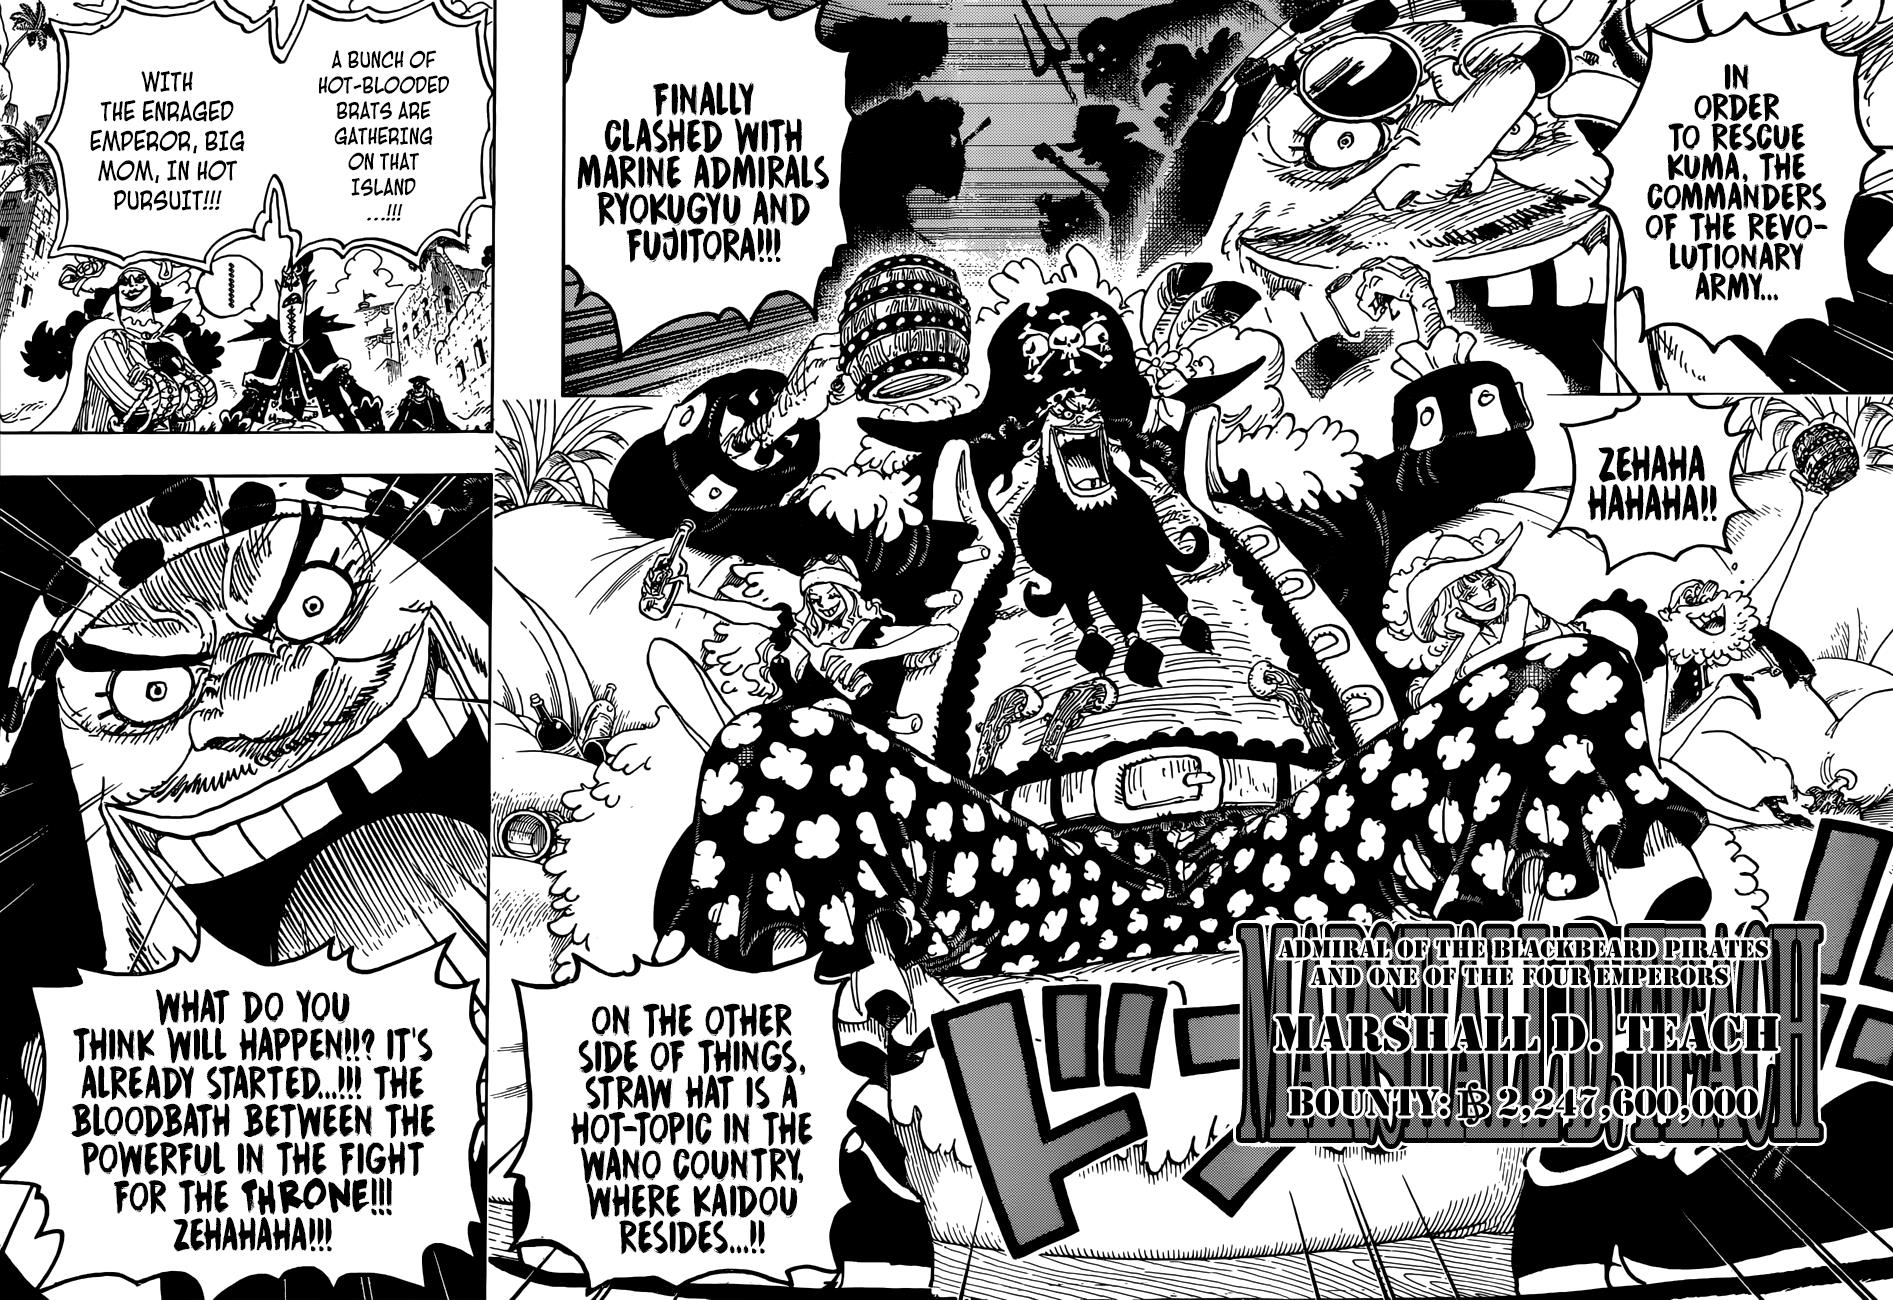 One Piece Episode 917 The Holy Land In Tumult The Yonko Blackbeard Laughs Boldly Page 4 Worstgen